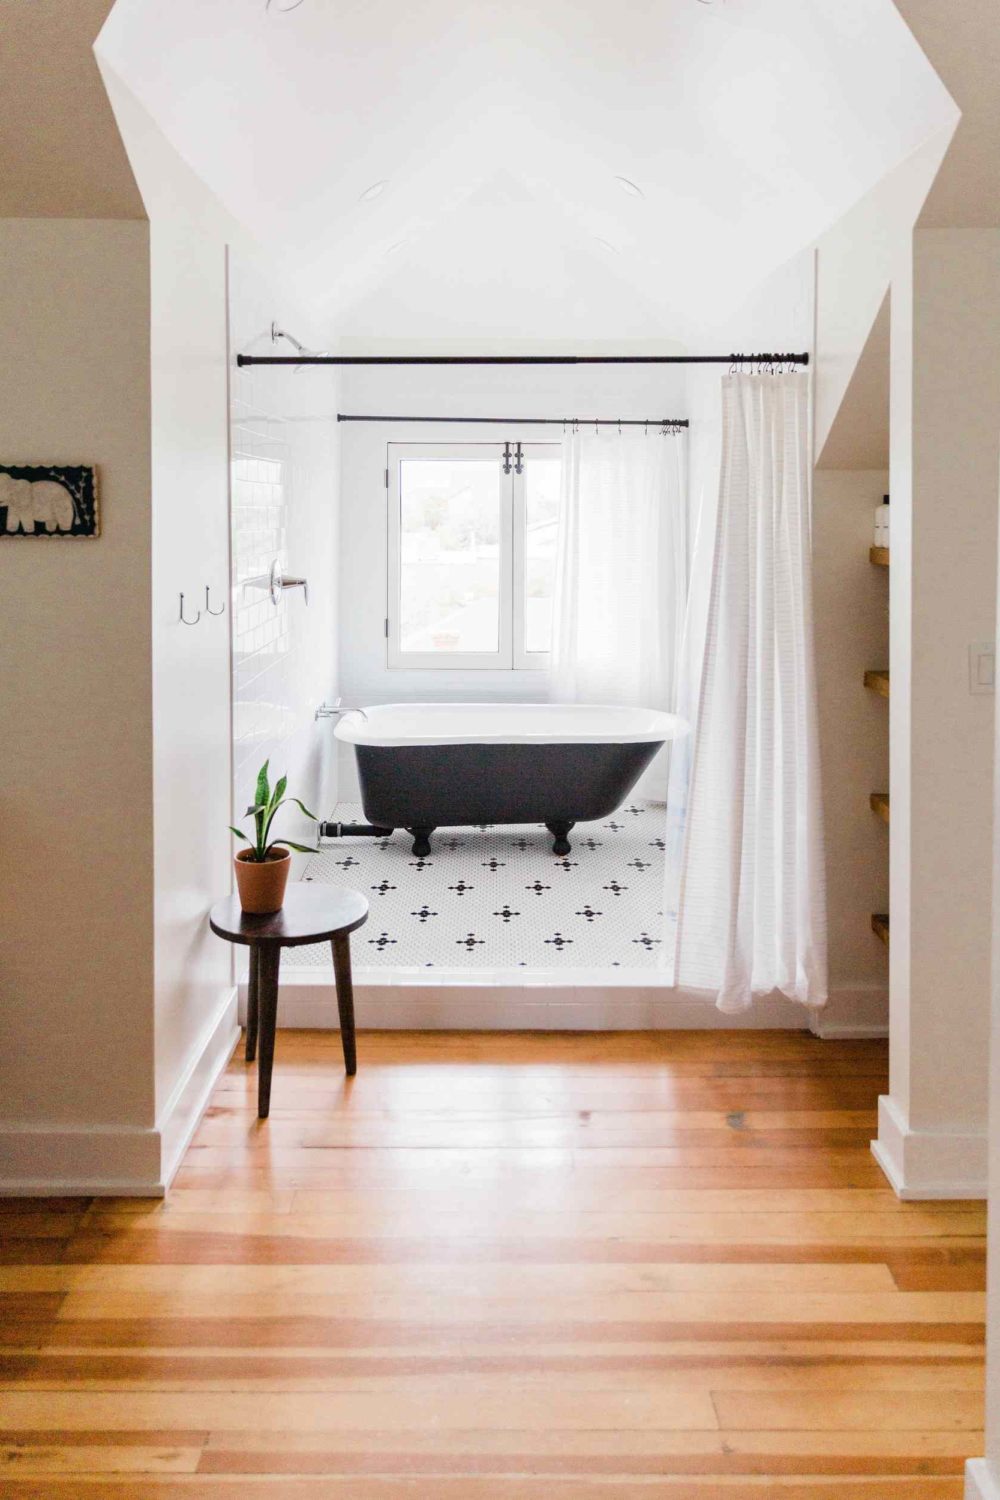 6 Factors Impacting Your Bathroom's Efficiency and Functionality